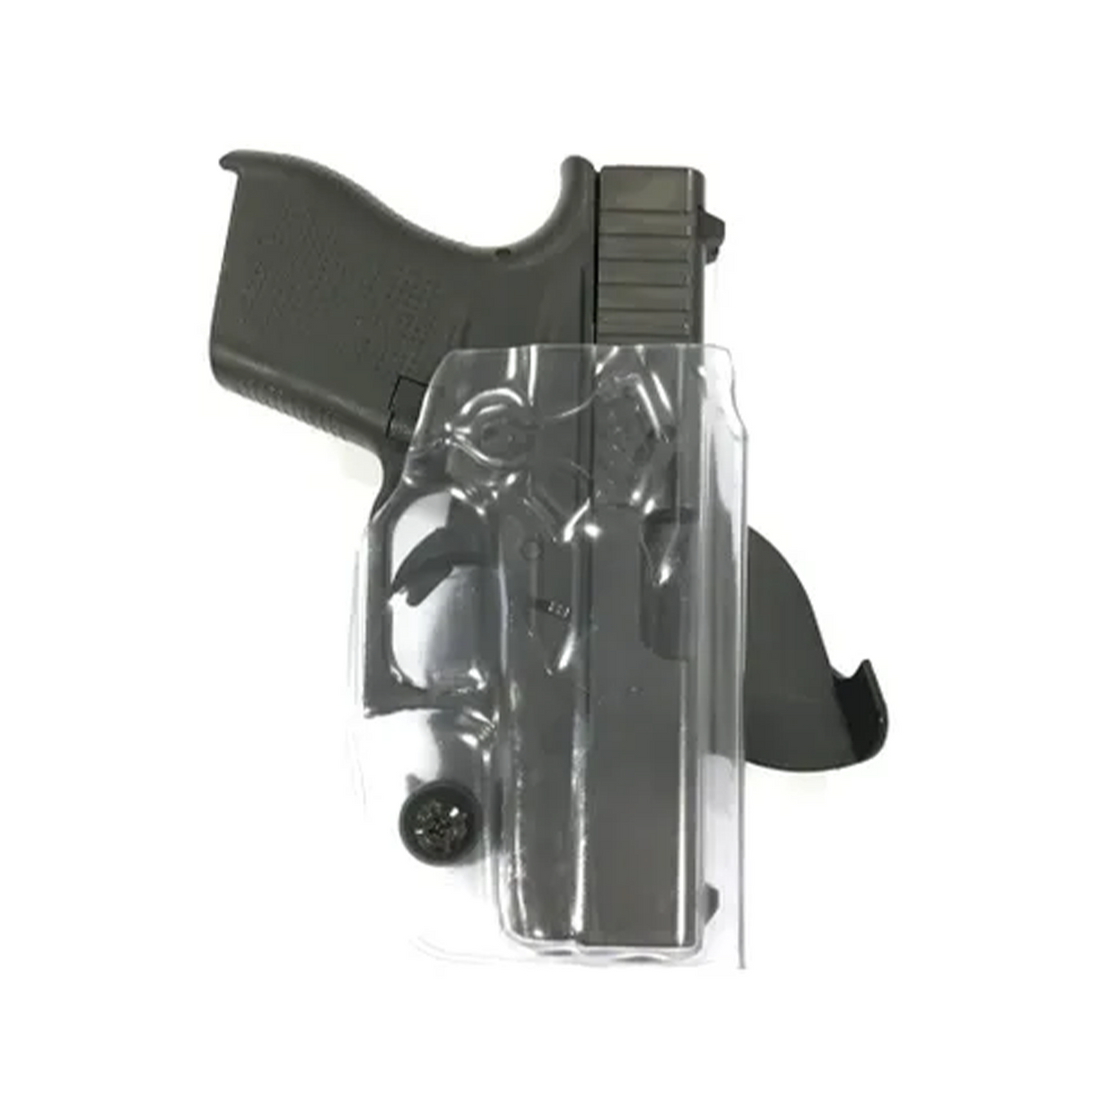 Mossberg OWB Paddle Holsters